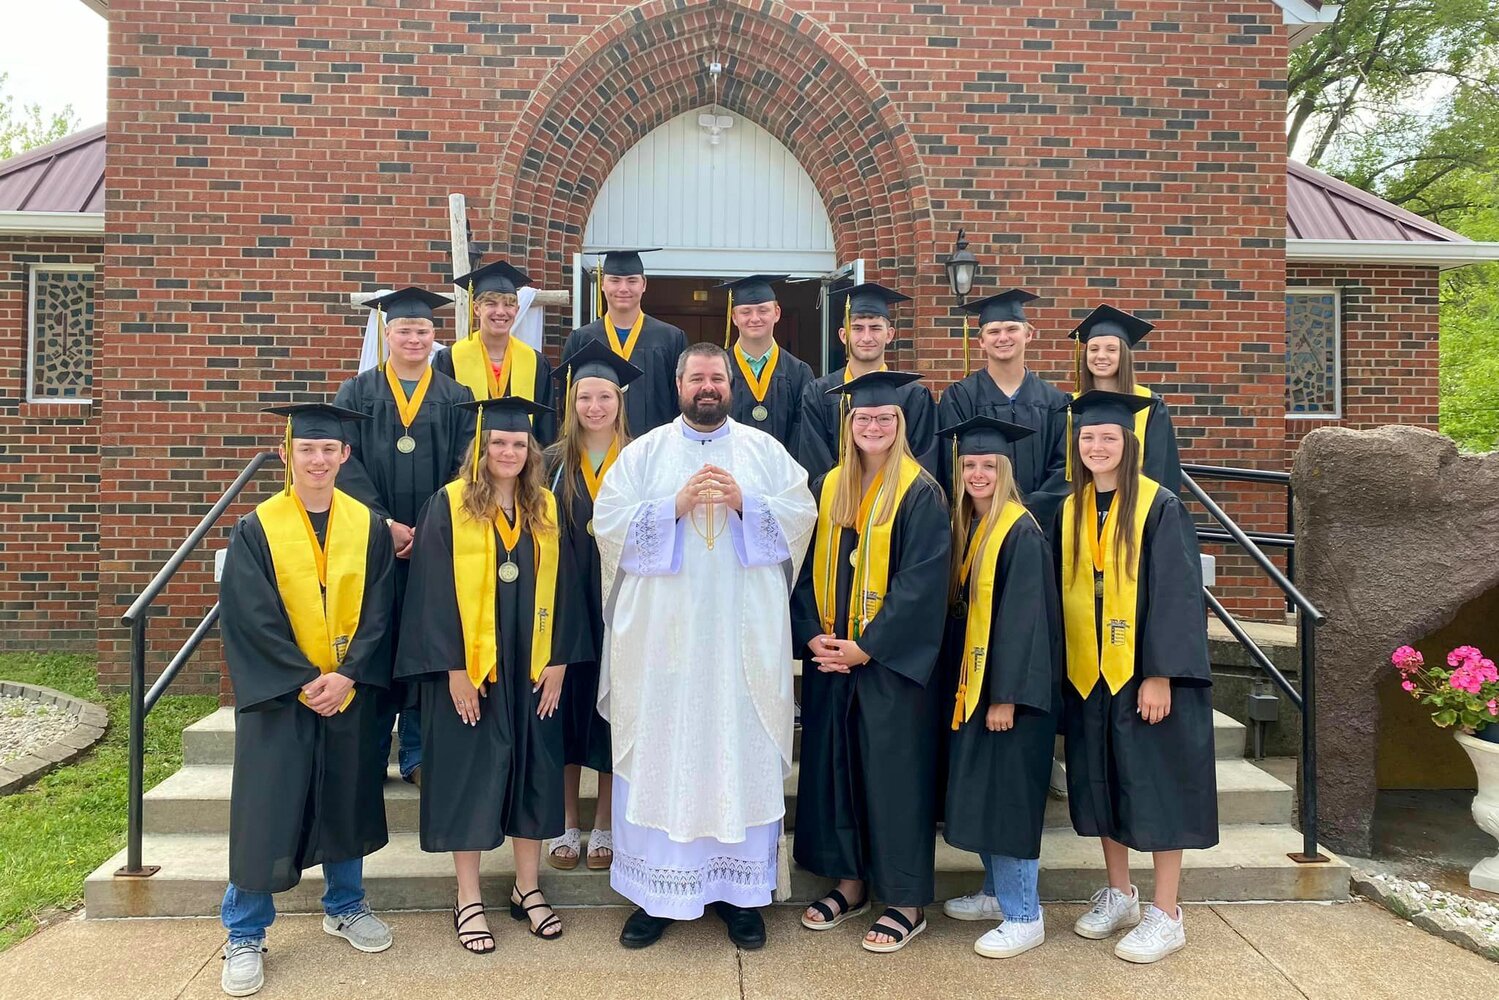 Father Christopher Aubuchon, parochial administrator of St. Lawrence Parish in St. Elizabeth and St. Anthony of Padua Parish in St. Anthony, gathers with parishioners in the Class of 2023 after Mass on May 14 in St. Anthony of Padua Church.